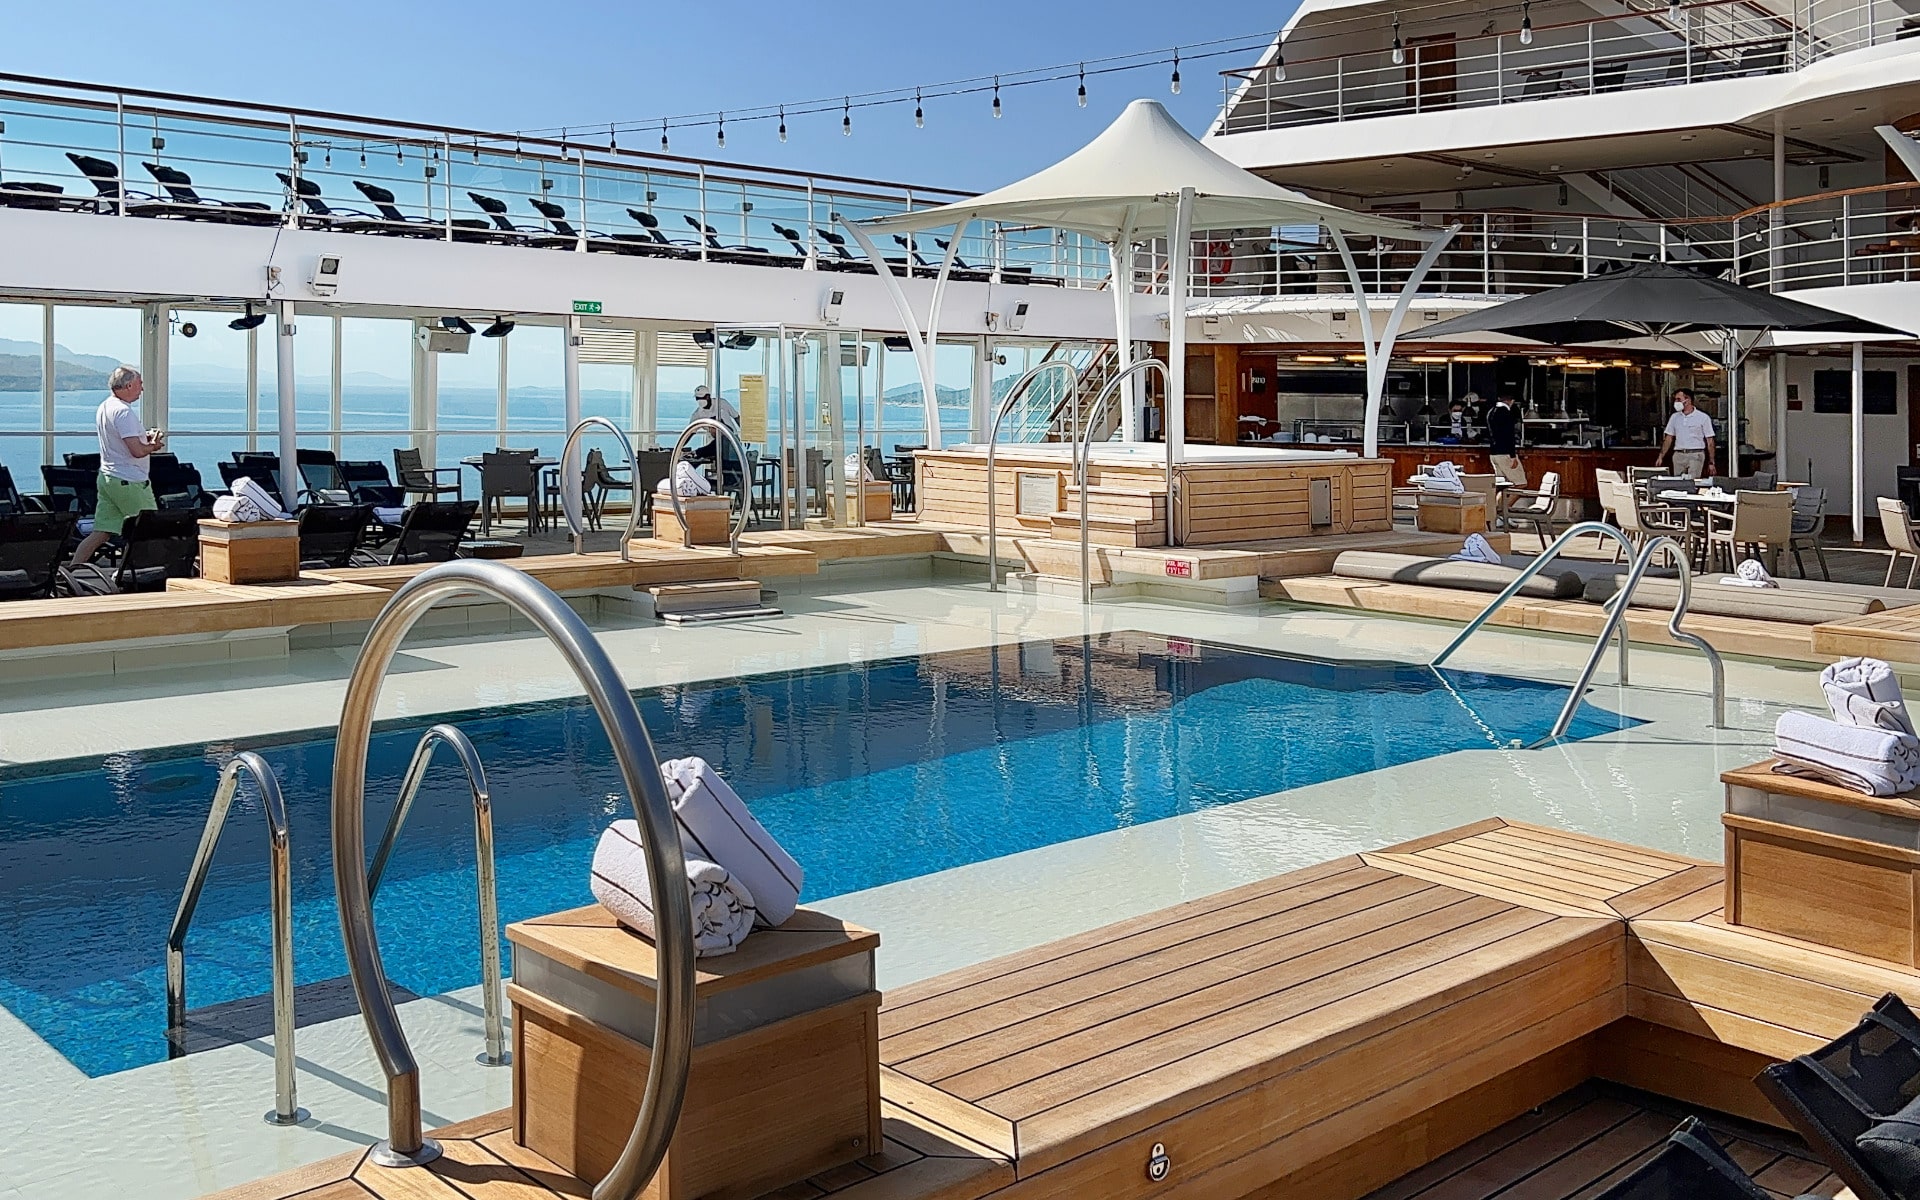 The Seabourn Quest pool.